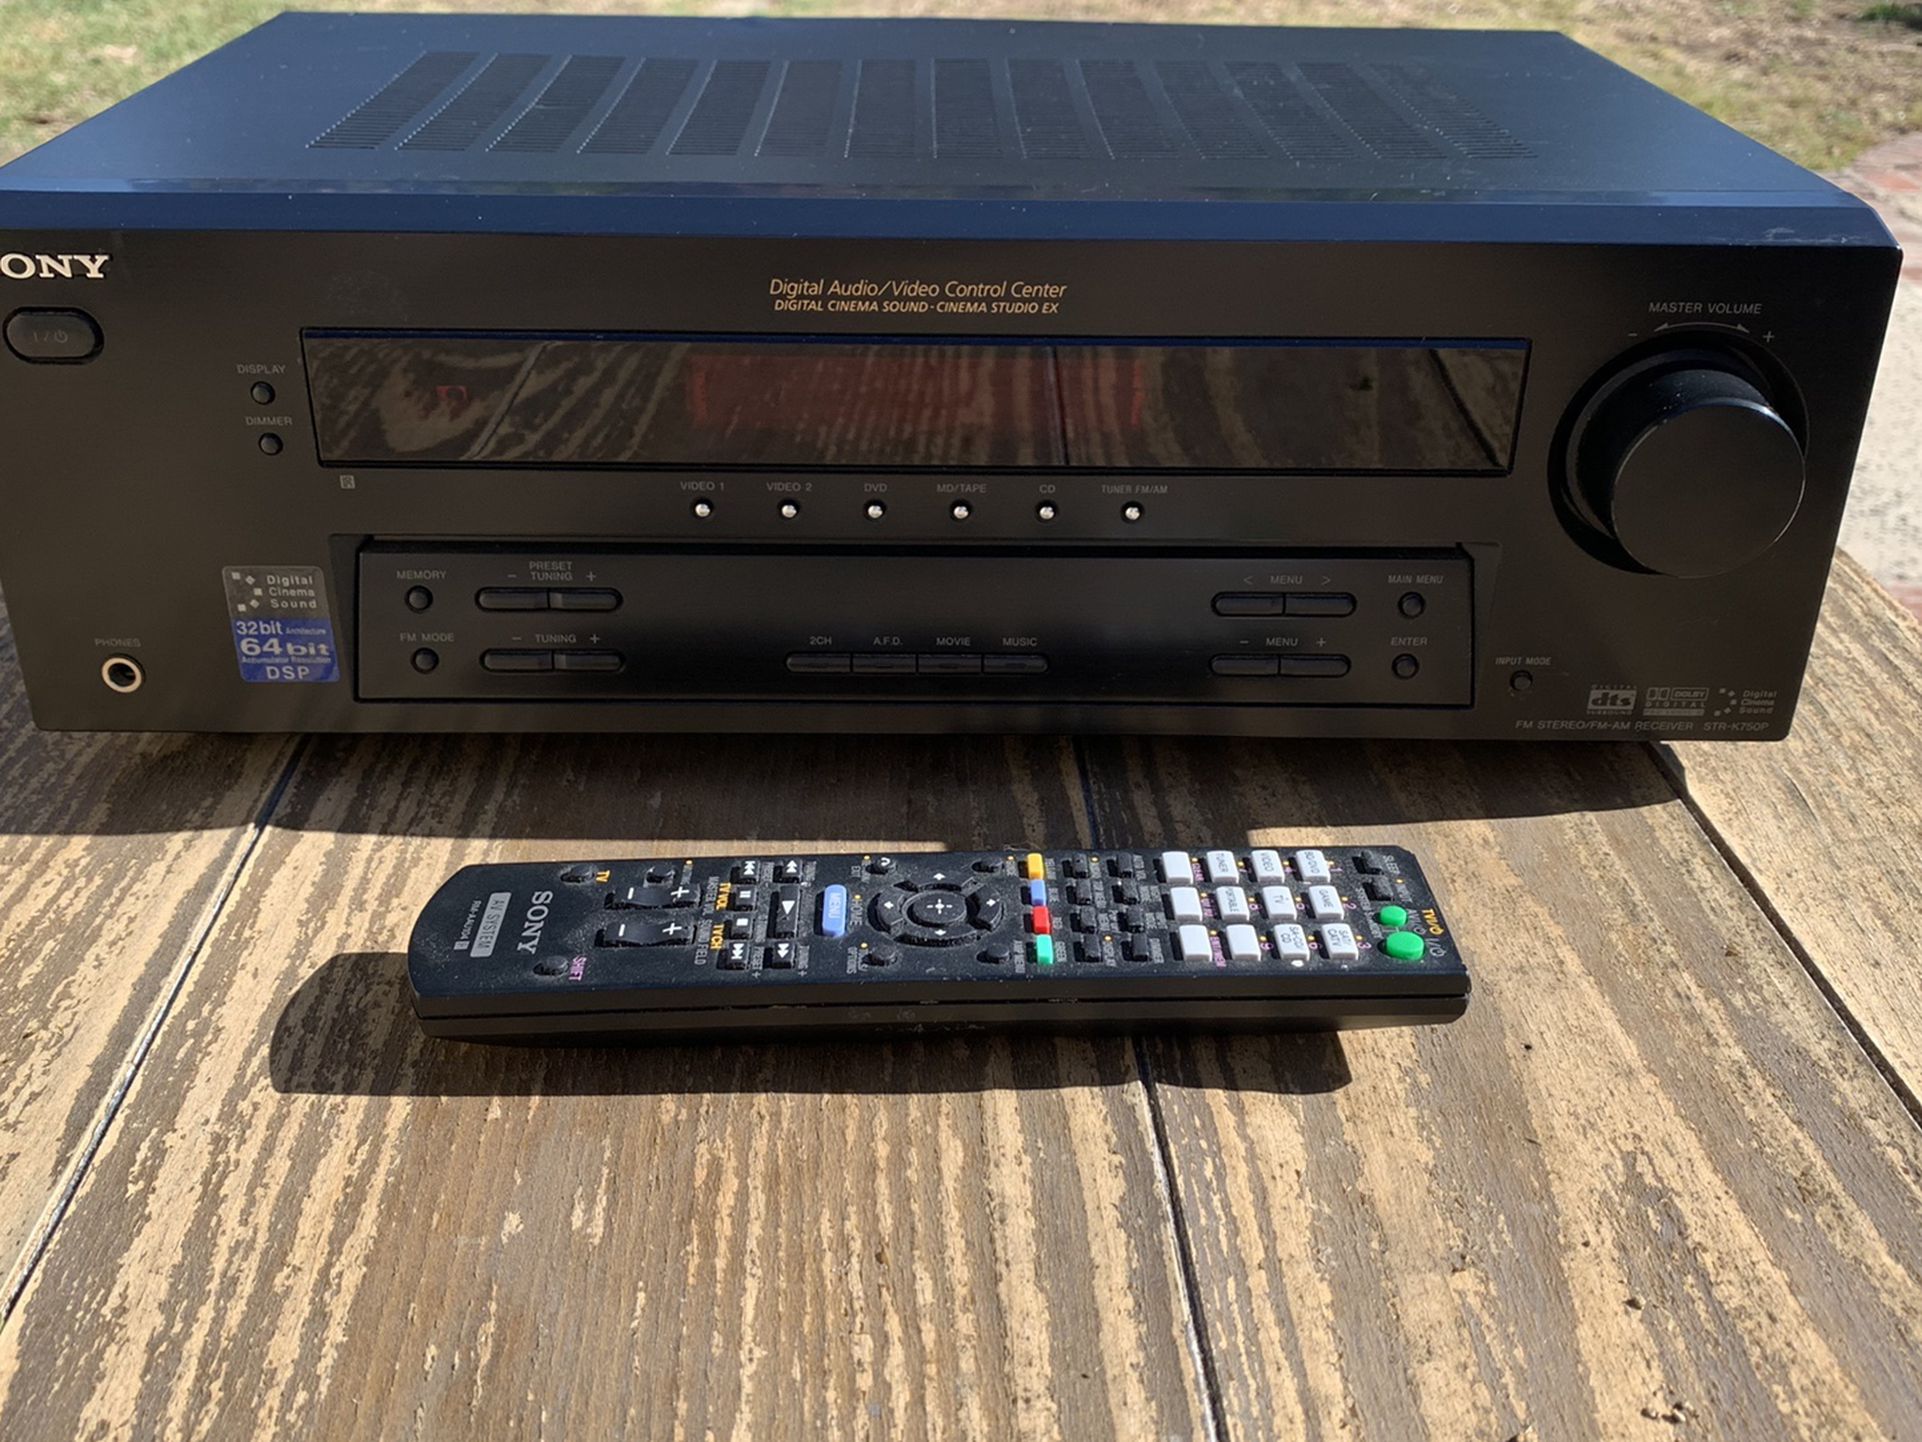 Sony STR-K750P 5.1 Channel AV Surround Sound Receiver - Tested And Works - Includes Remote